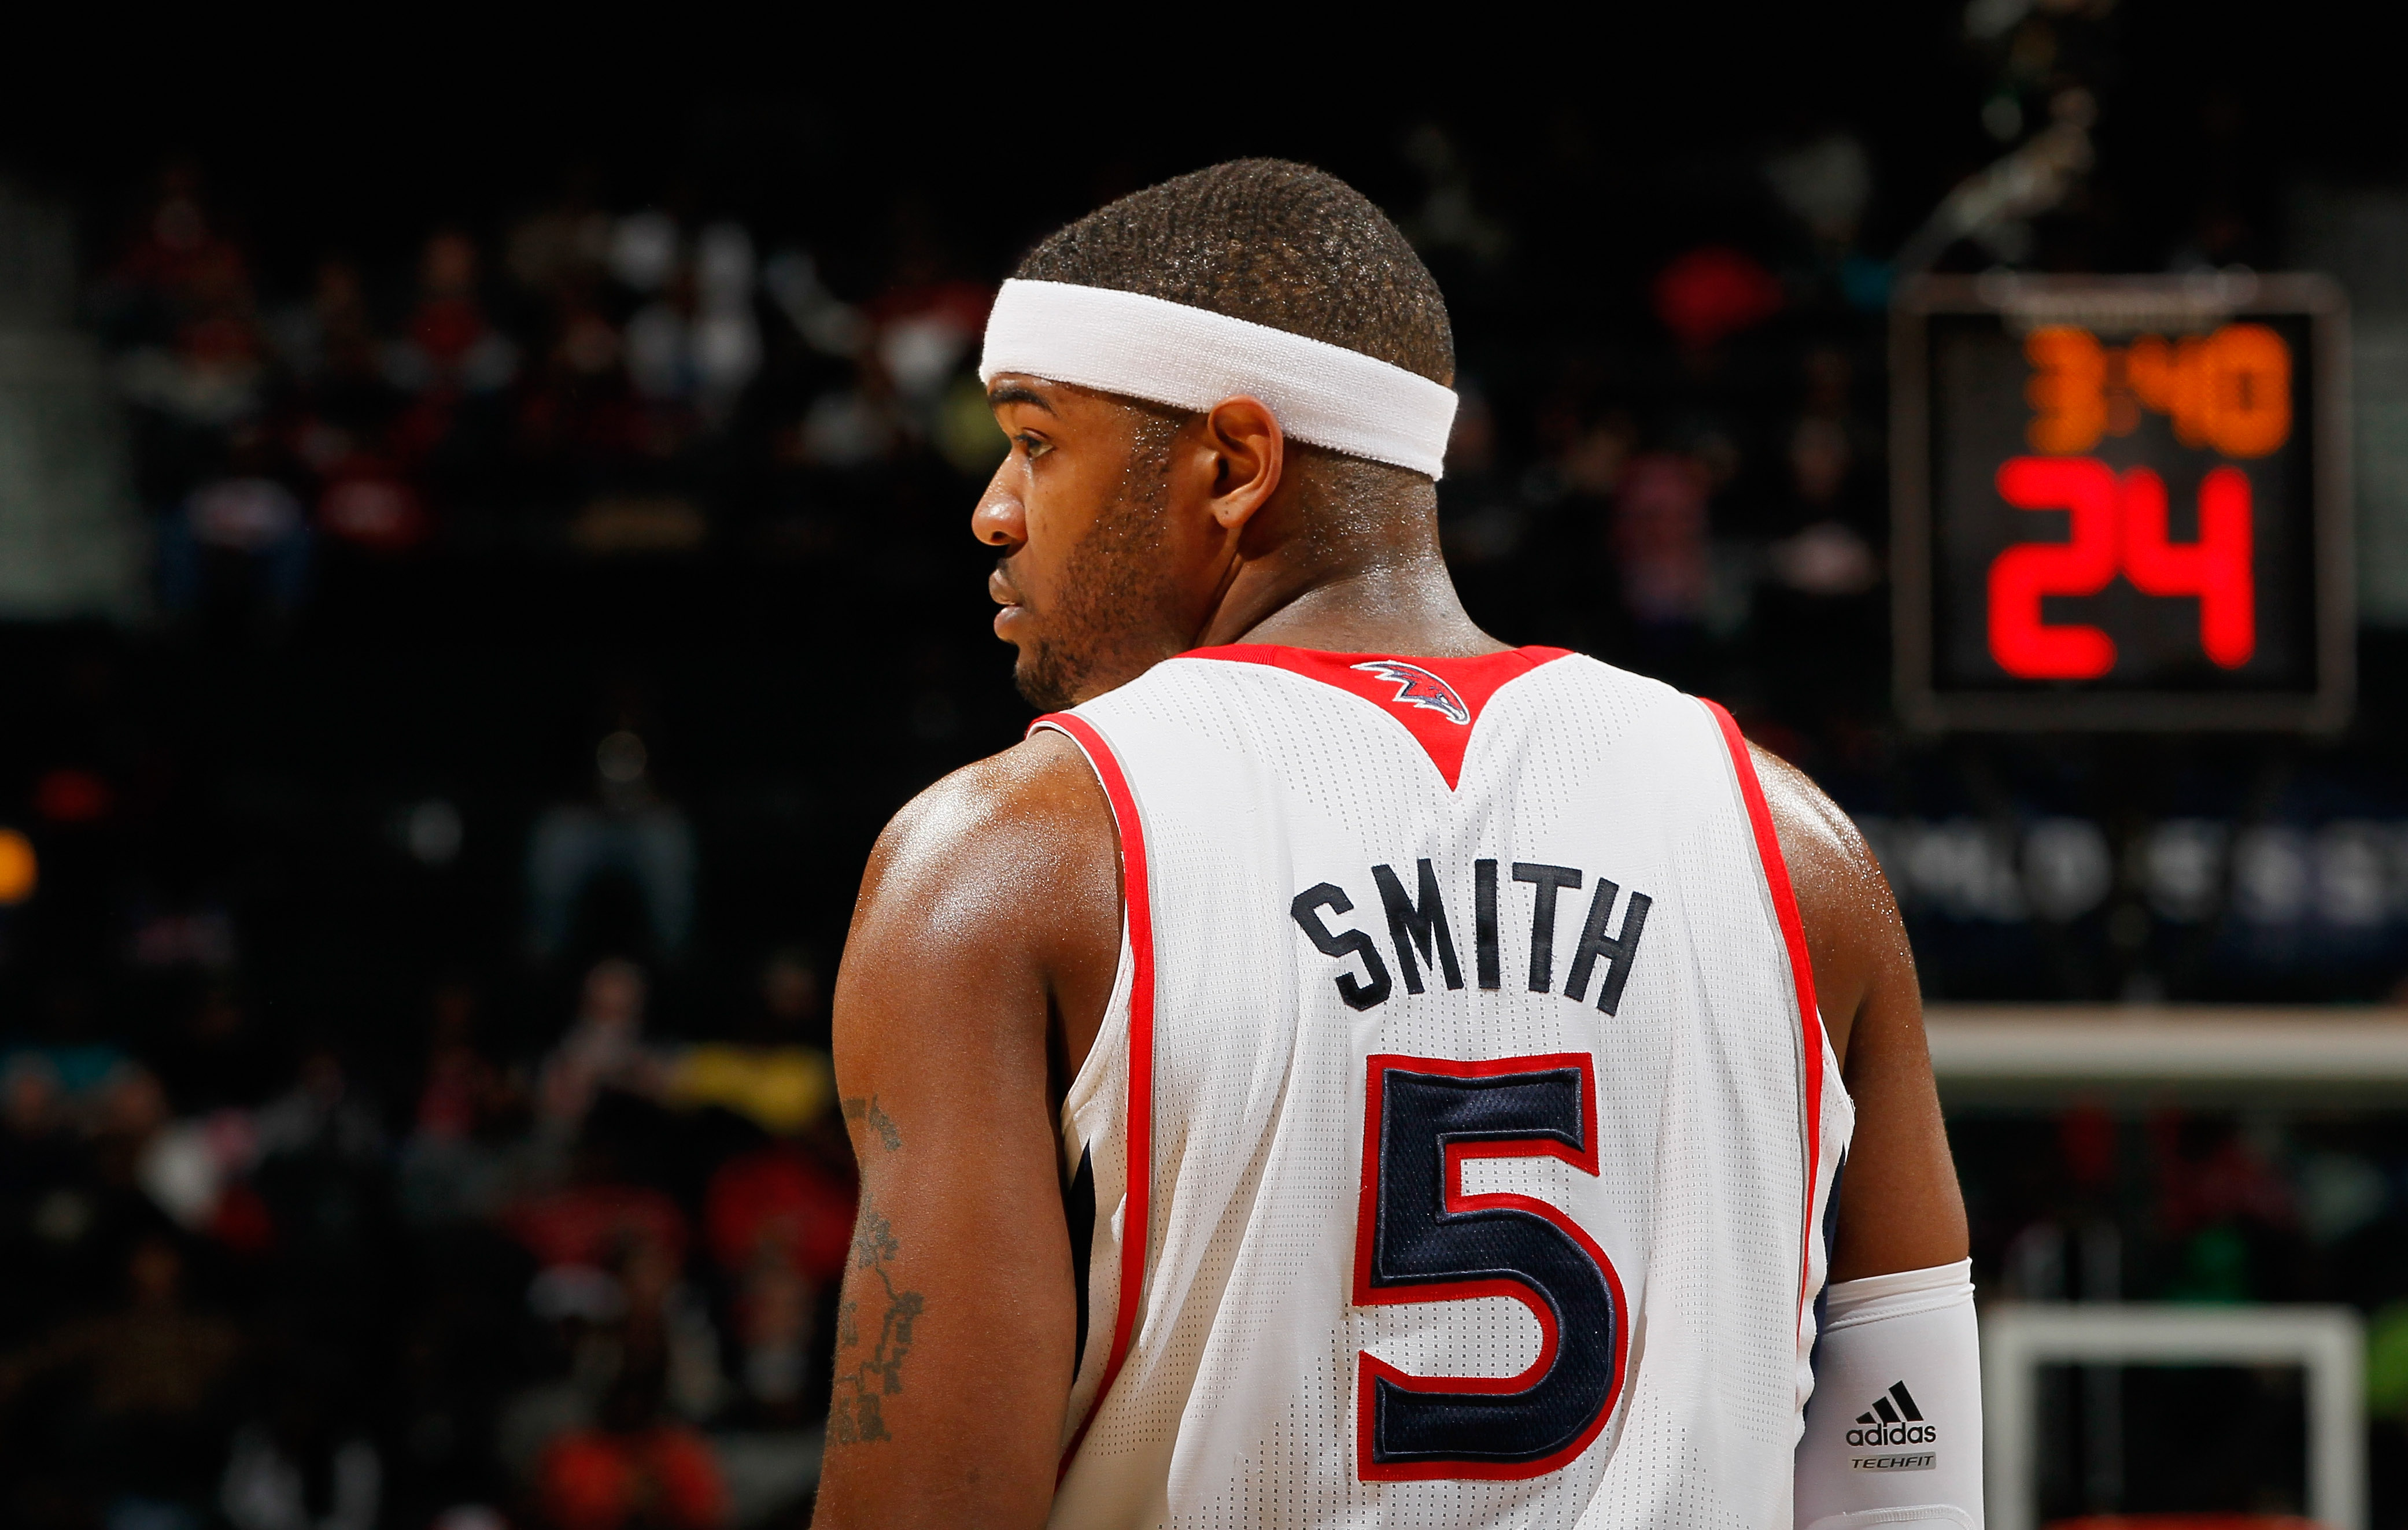 ATLANTA, GA - FEBRUARY 12:  Josh Smith #5 of the Atlanta Hawks waits for an inbounds pass by the Charlotte Bobcats at Philips Arena on February 12, 2011 in Atlanta, Georgia.  NOTE TO USER: User expressly acknowledges and agrees that, by downloading and/or